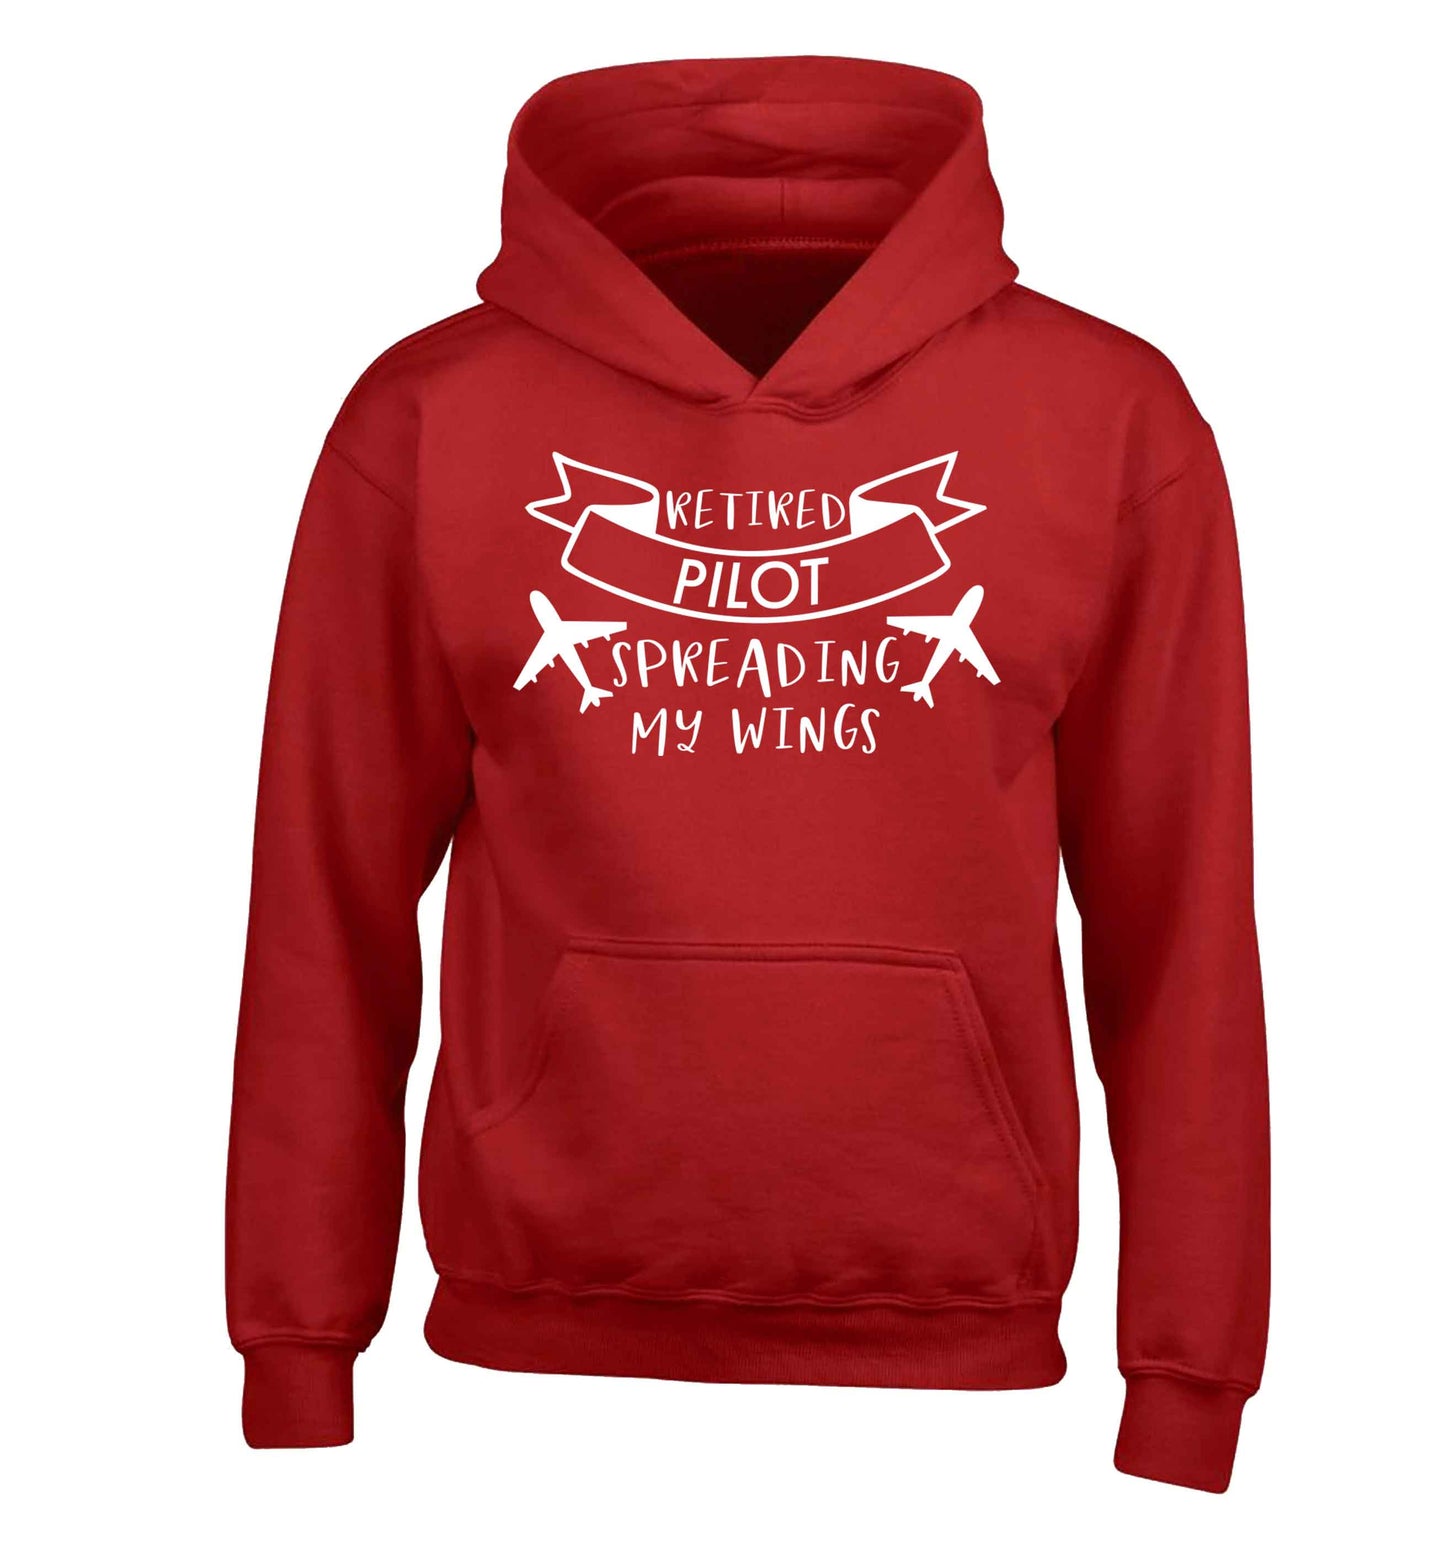 Retired pilot spreading my wings children's red hoodie 12-13 Years